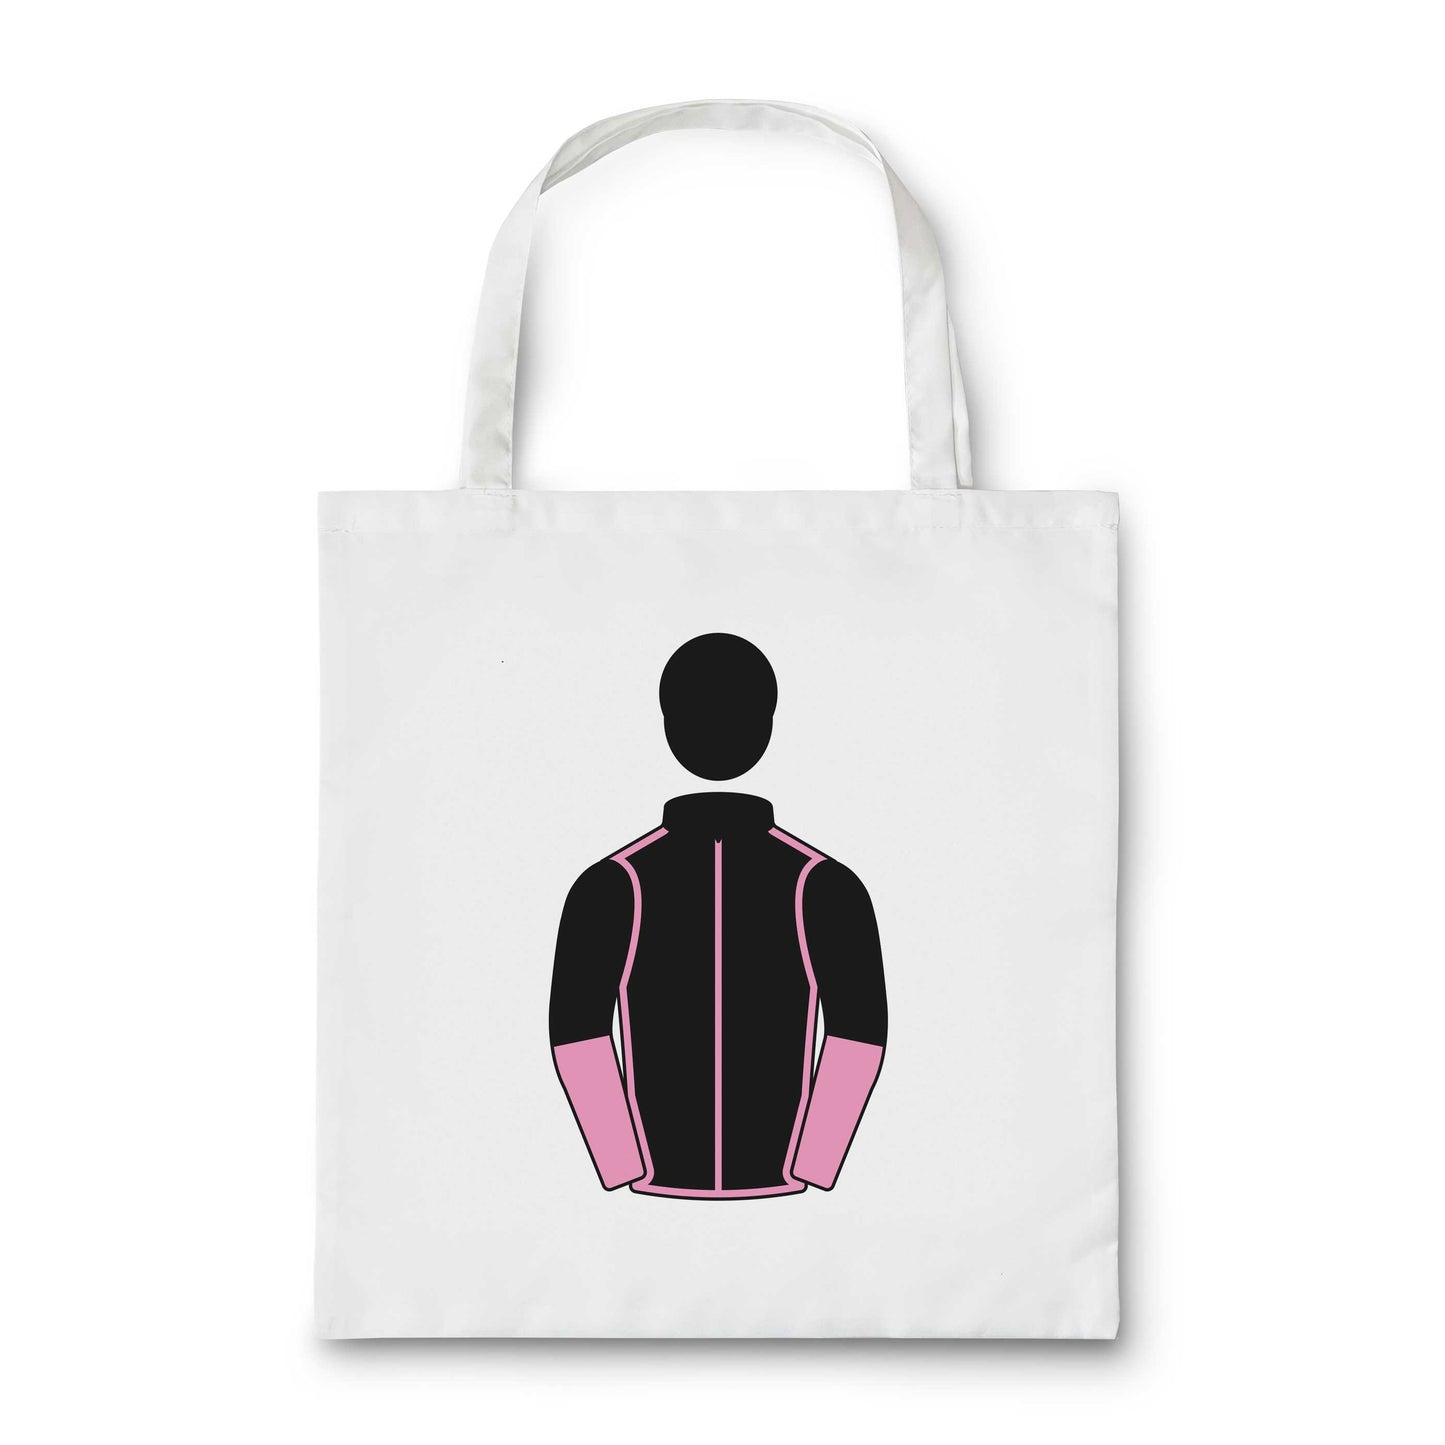 Claudio Michael Grech Tote Bag - Tote Bag - Hacked Up